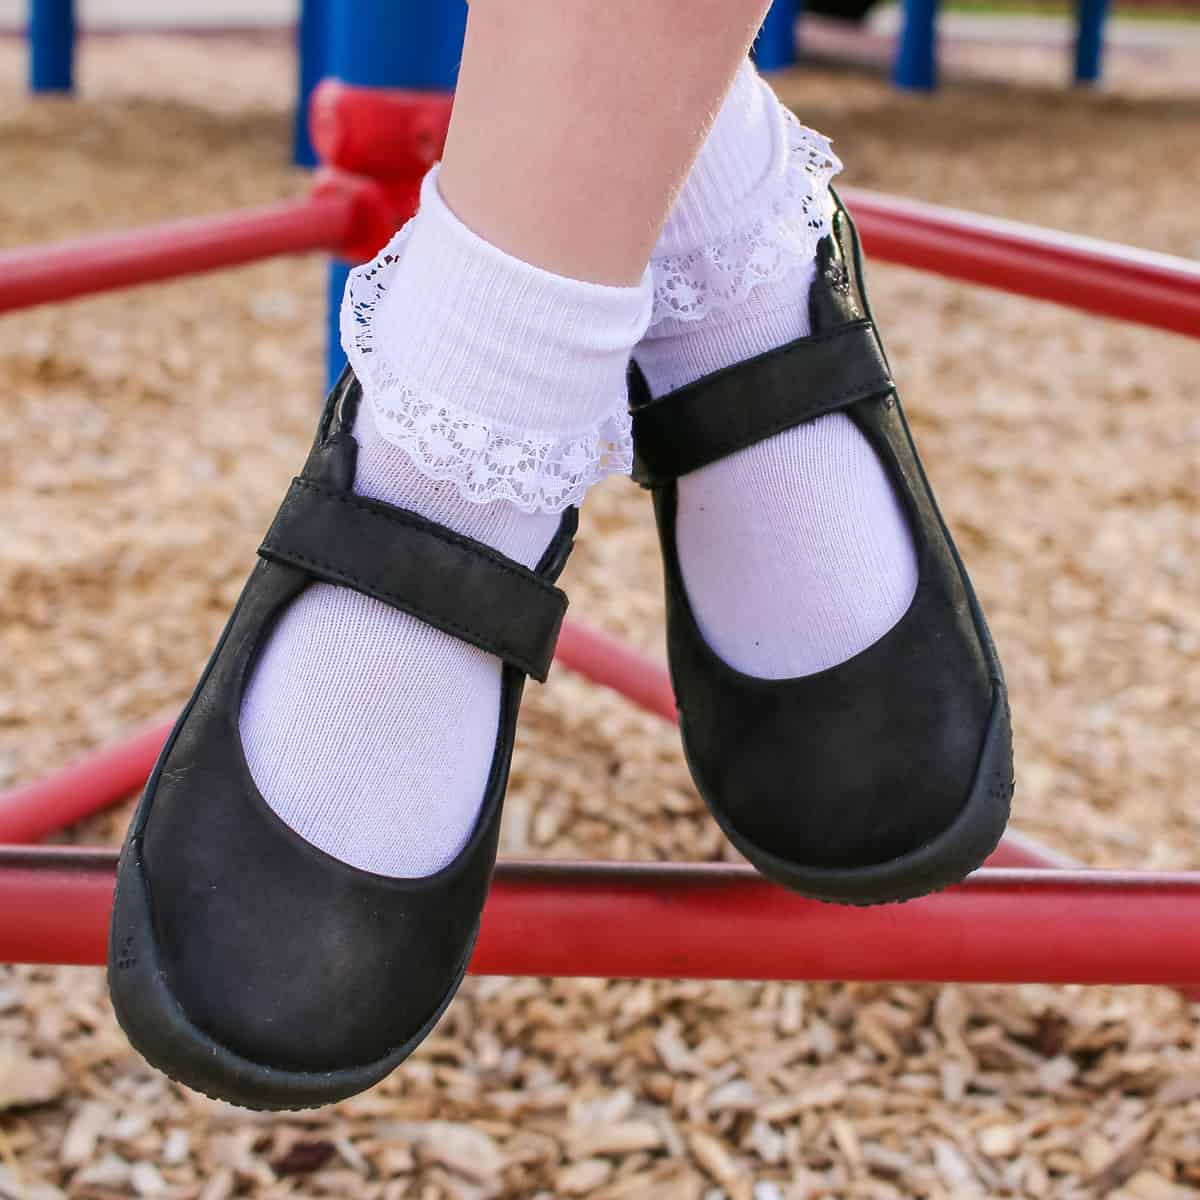 Vivobarefeet Daily Mom Parent Portal Holiday Guide 2018 New Shoes